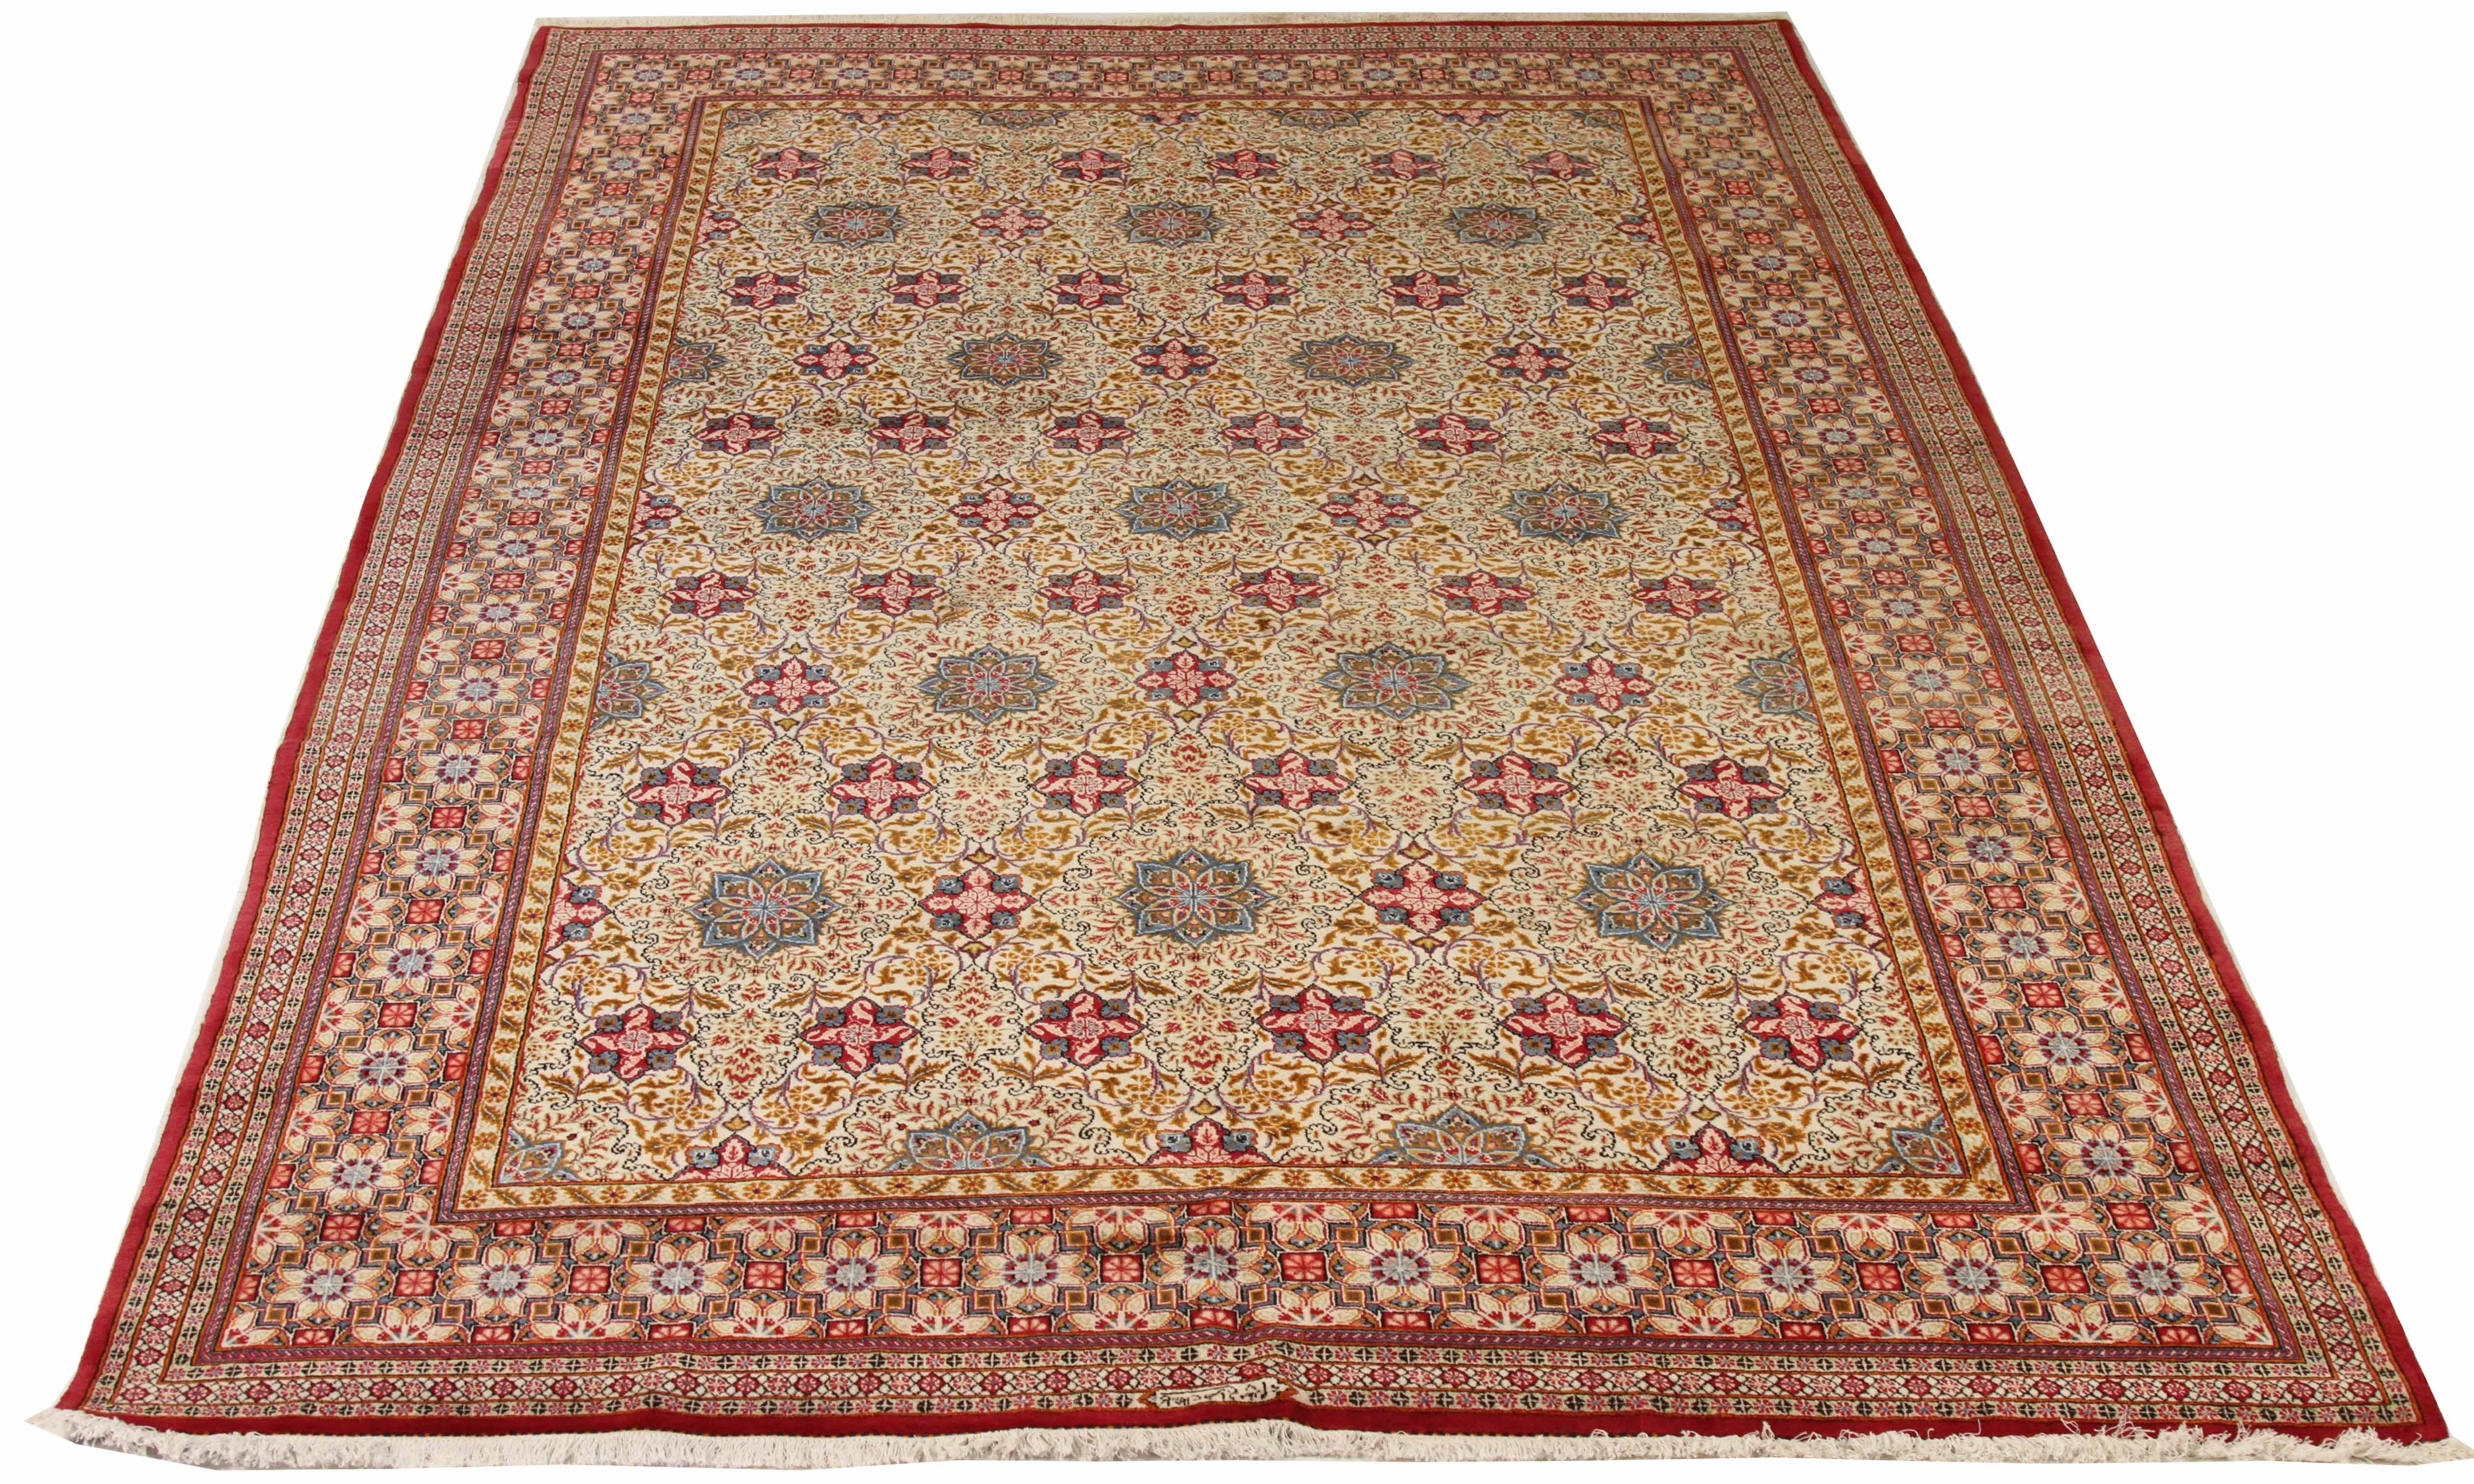 Vintage Persian area rug handwoven from the finest sheep’s wool. It’s colored with all-natural vegetable dyes that are safe for humans and pets. It’s a traditional Kashan design handwoven by expert artisans. It’s a lovely area rug that can be